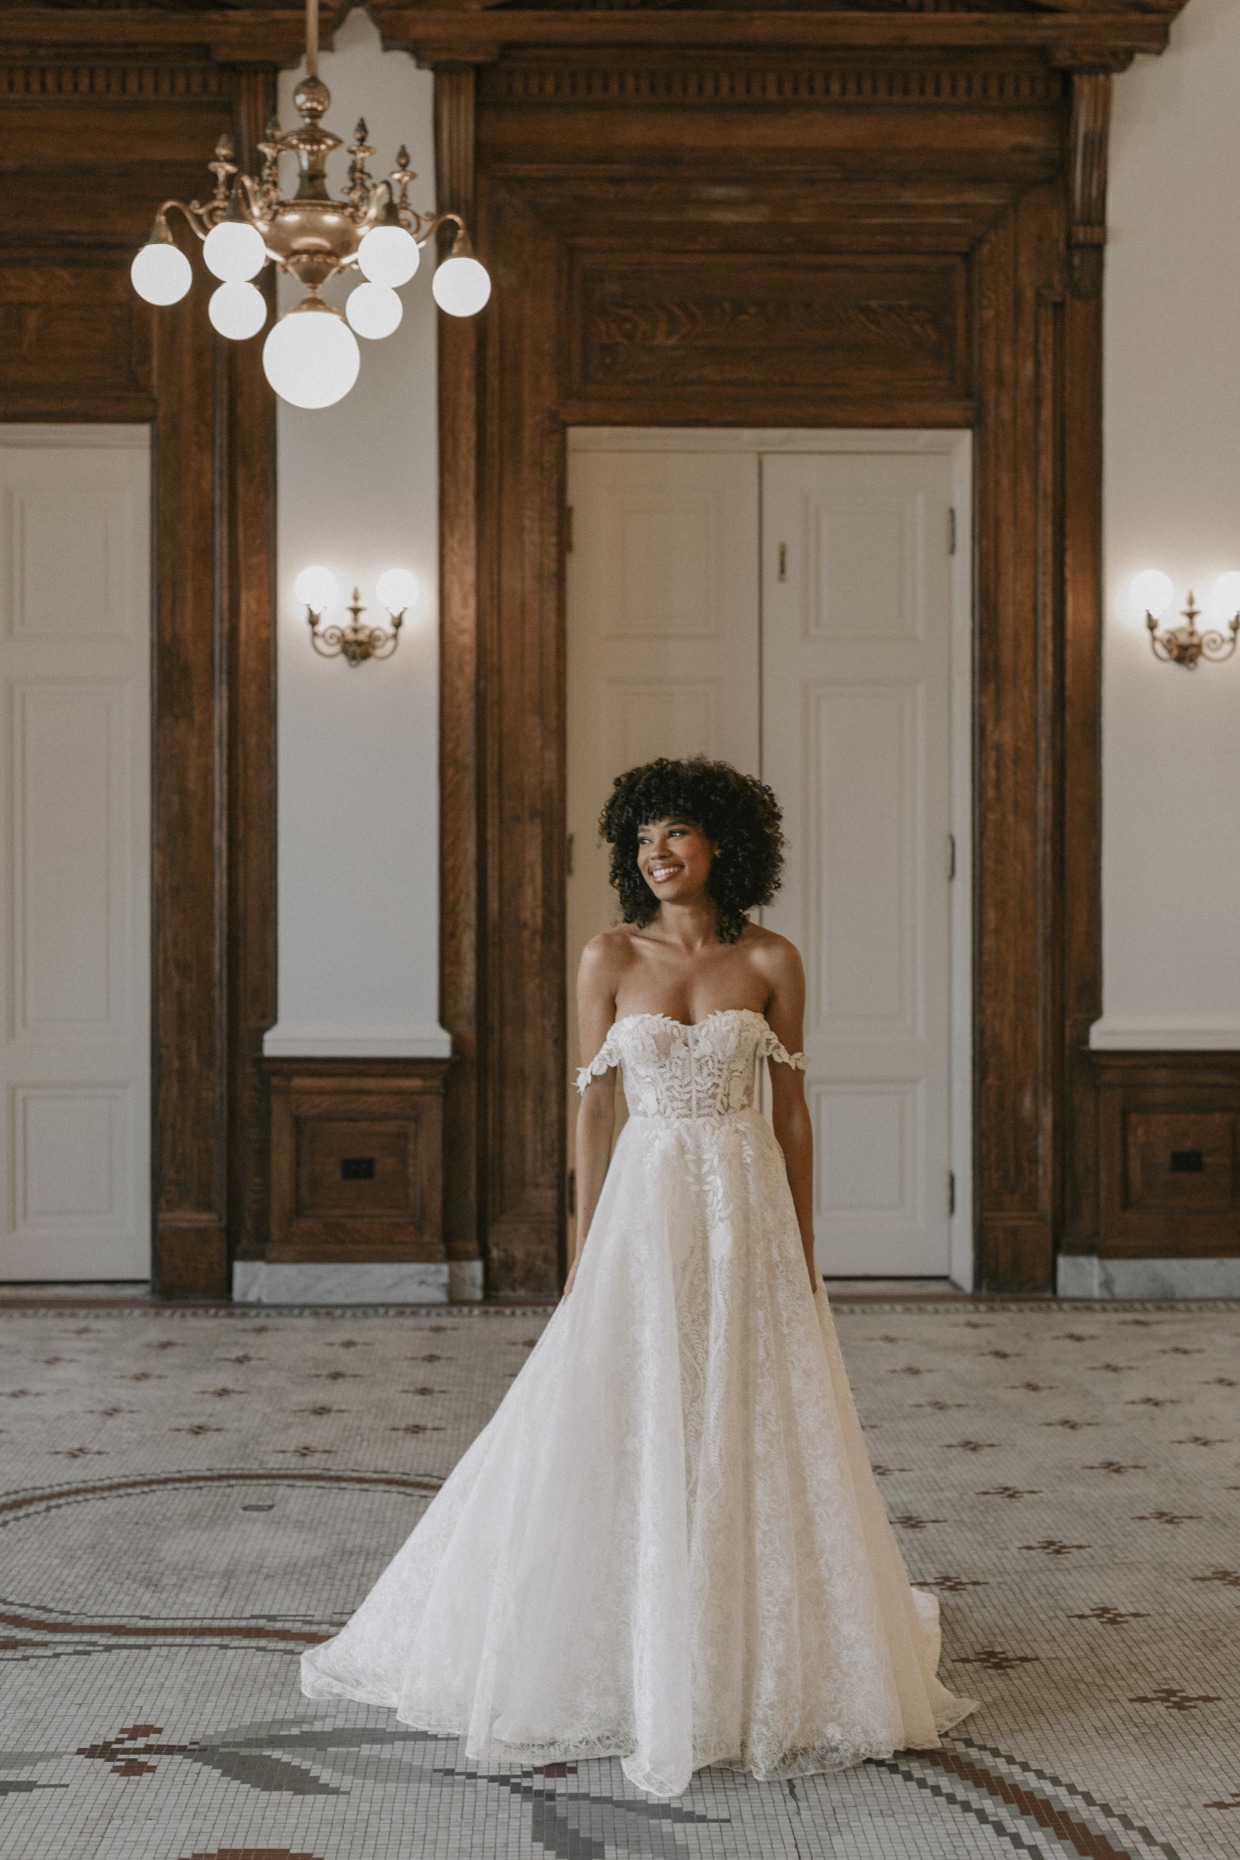 Saint Bridal ‘Cole’ Wedding Dress from Lovely Bride